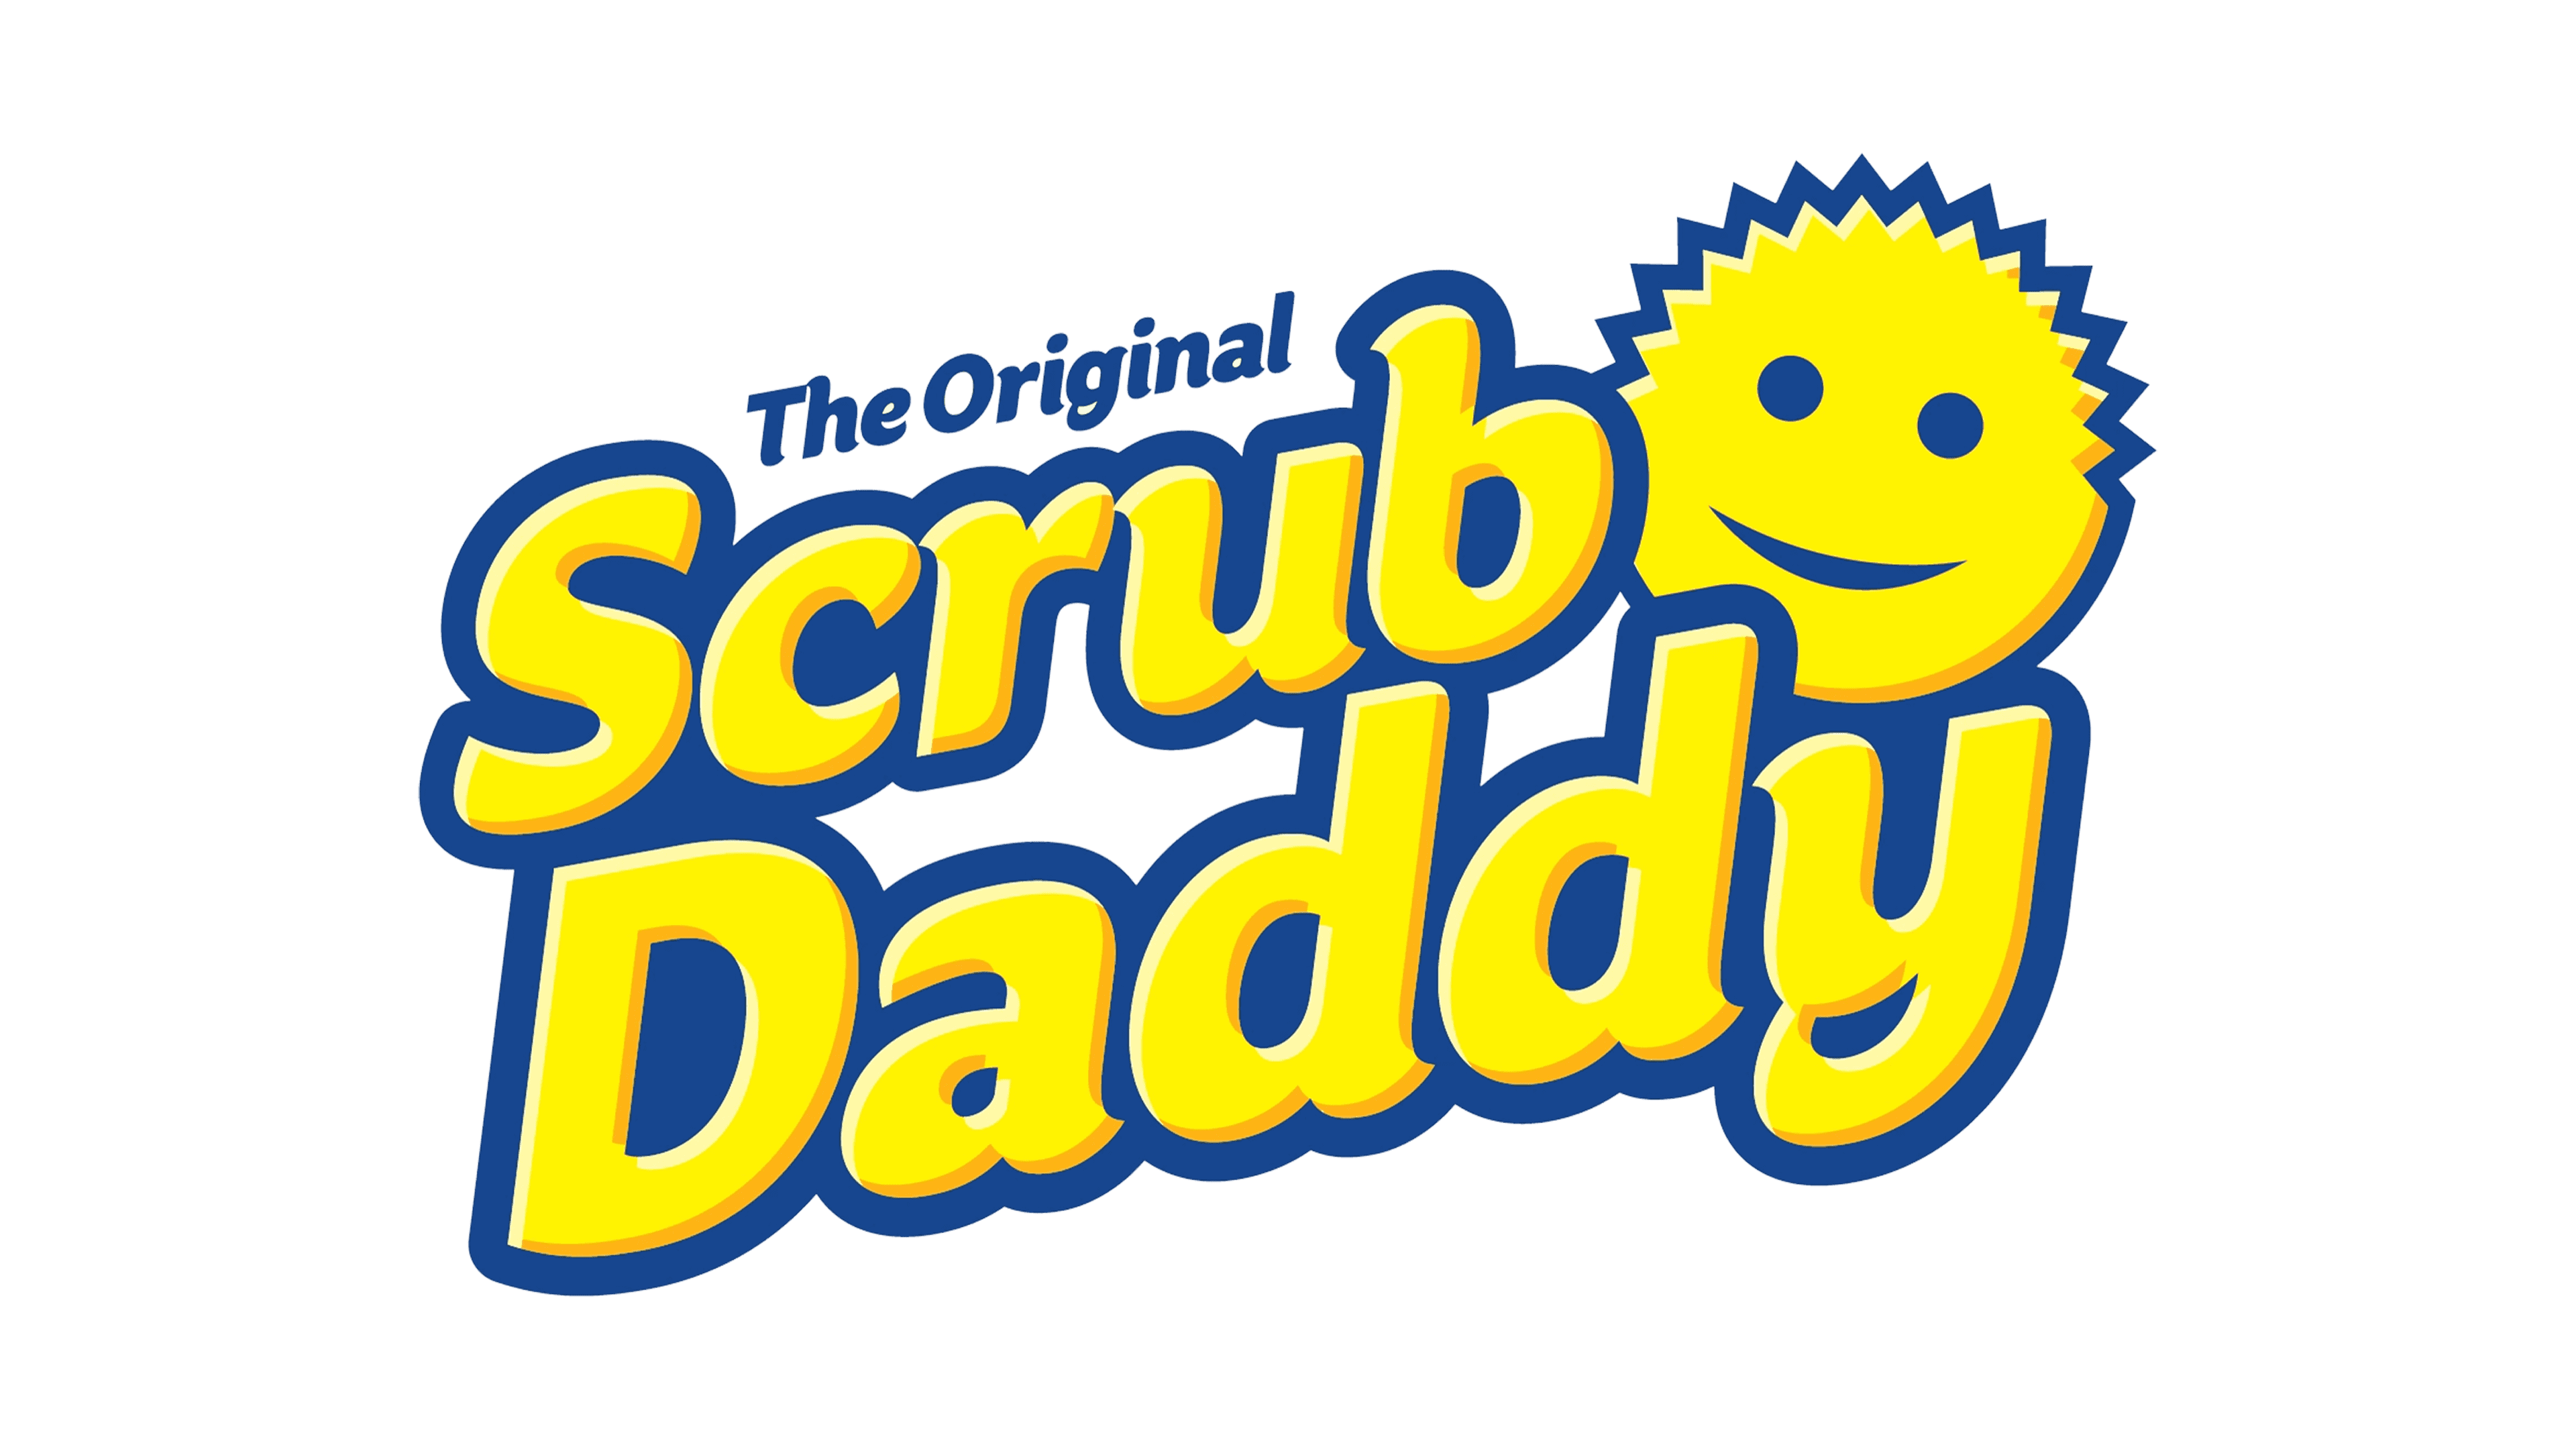 Comparing The Viral Scrub Daddy Against Everyday Sponges